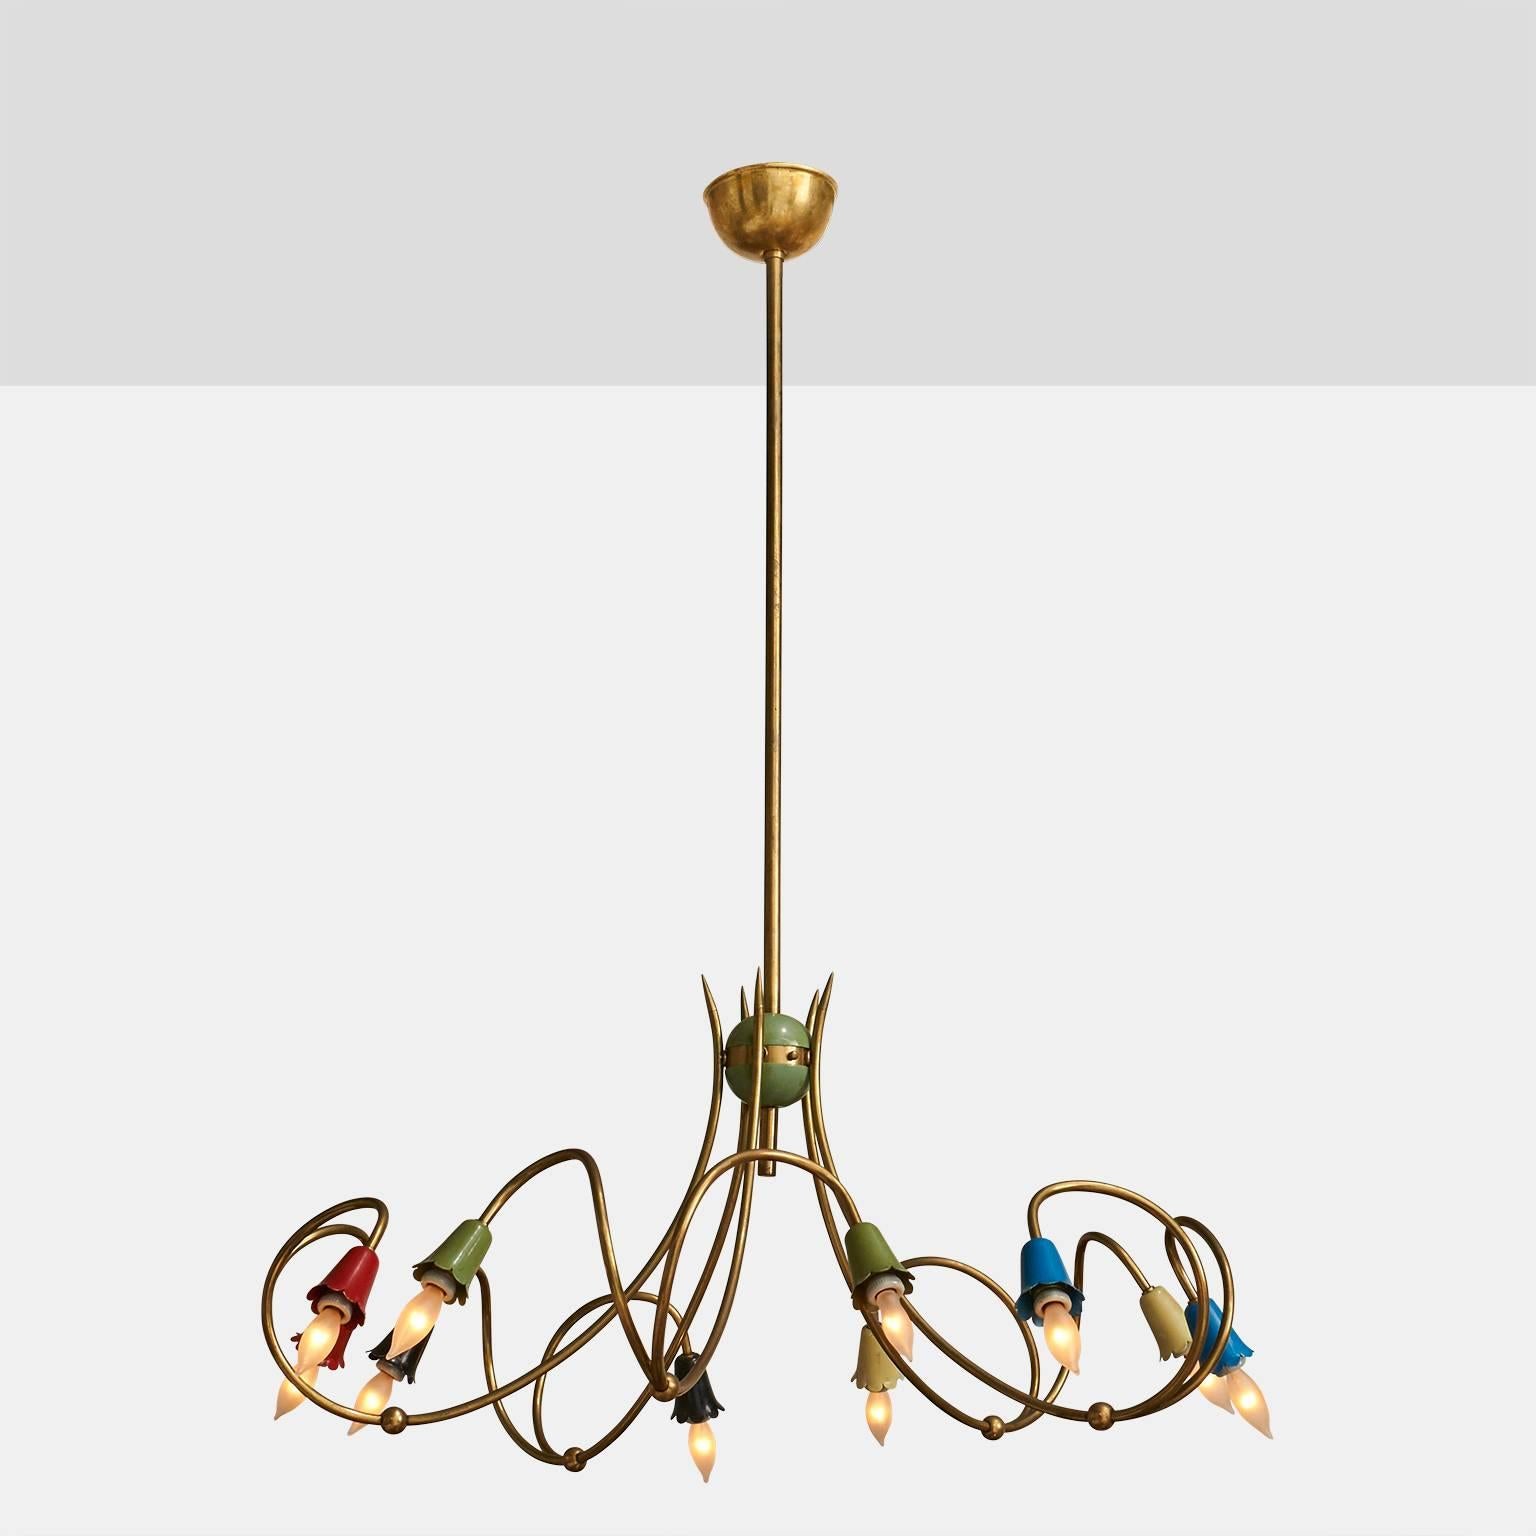 A brass chandelier with ten lights and red, olive and blue lacquered floral shaped caps, Italy, circa 1950s.